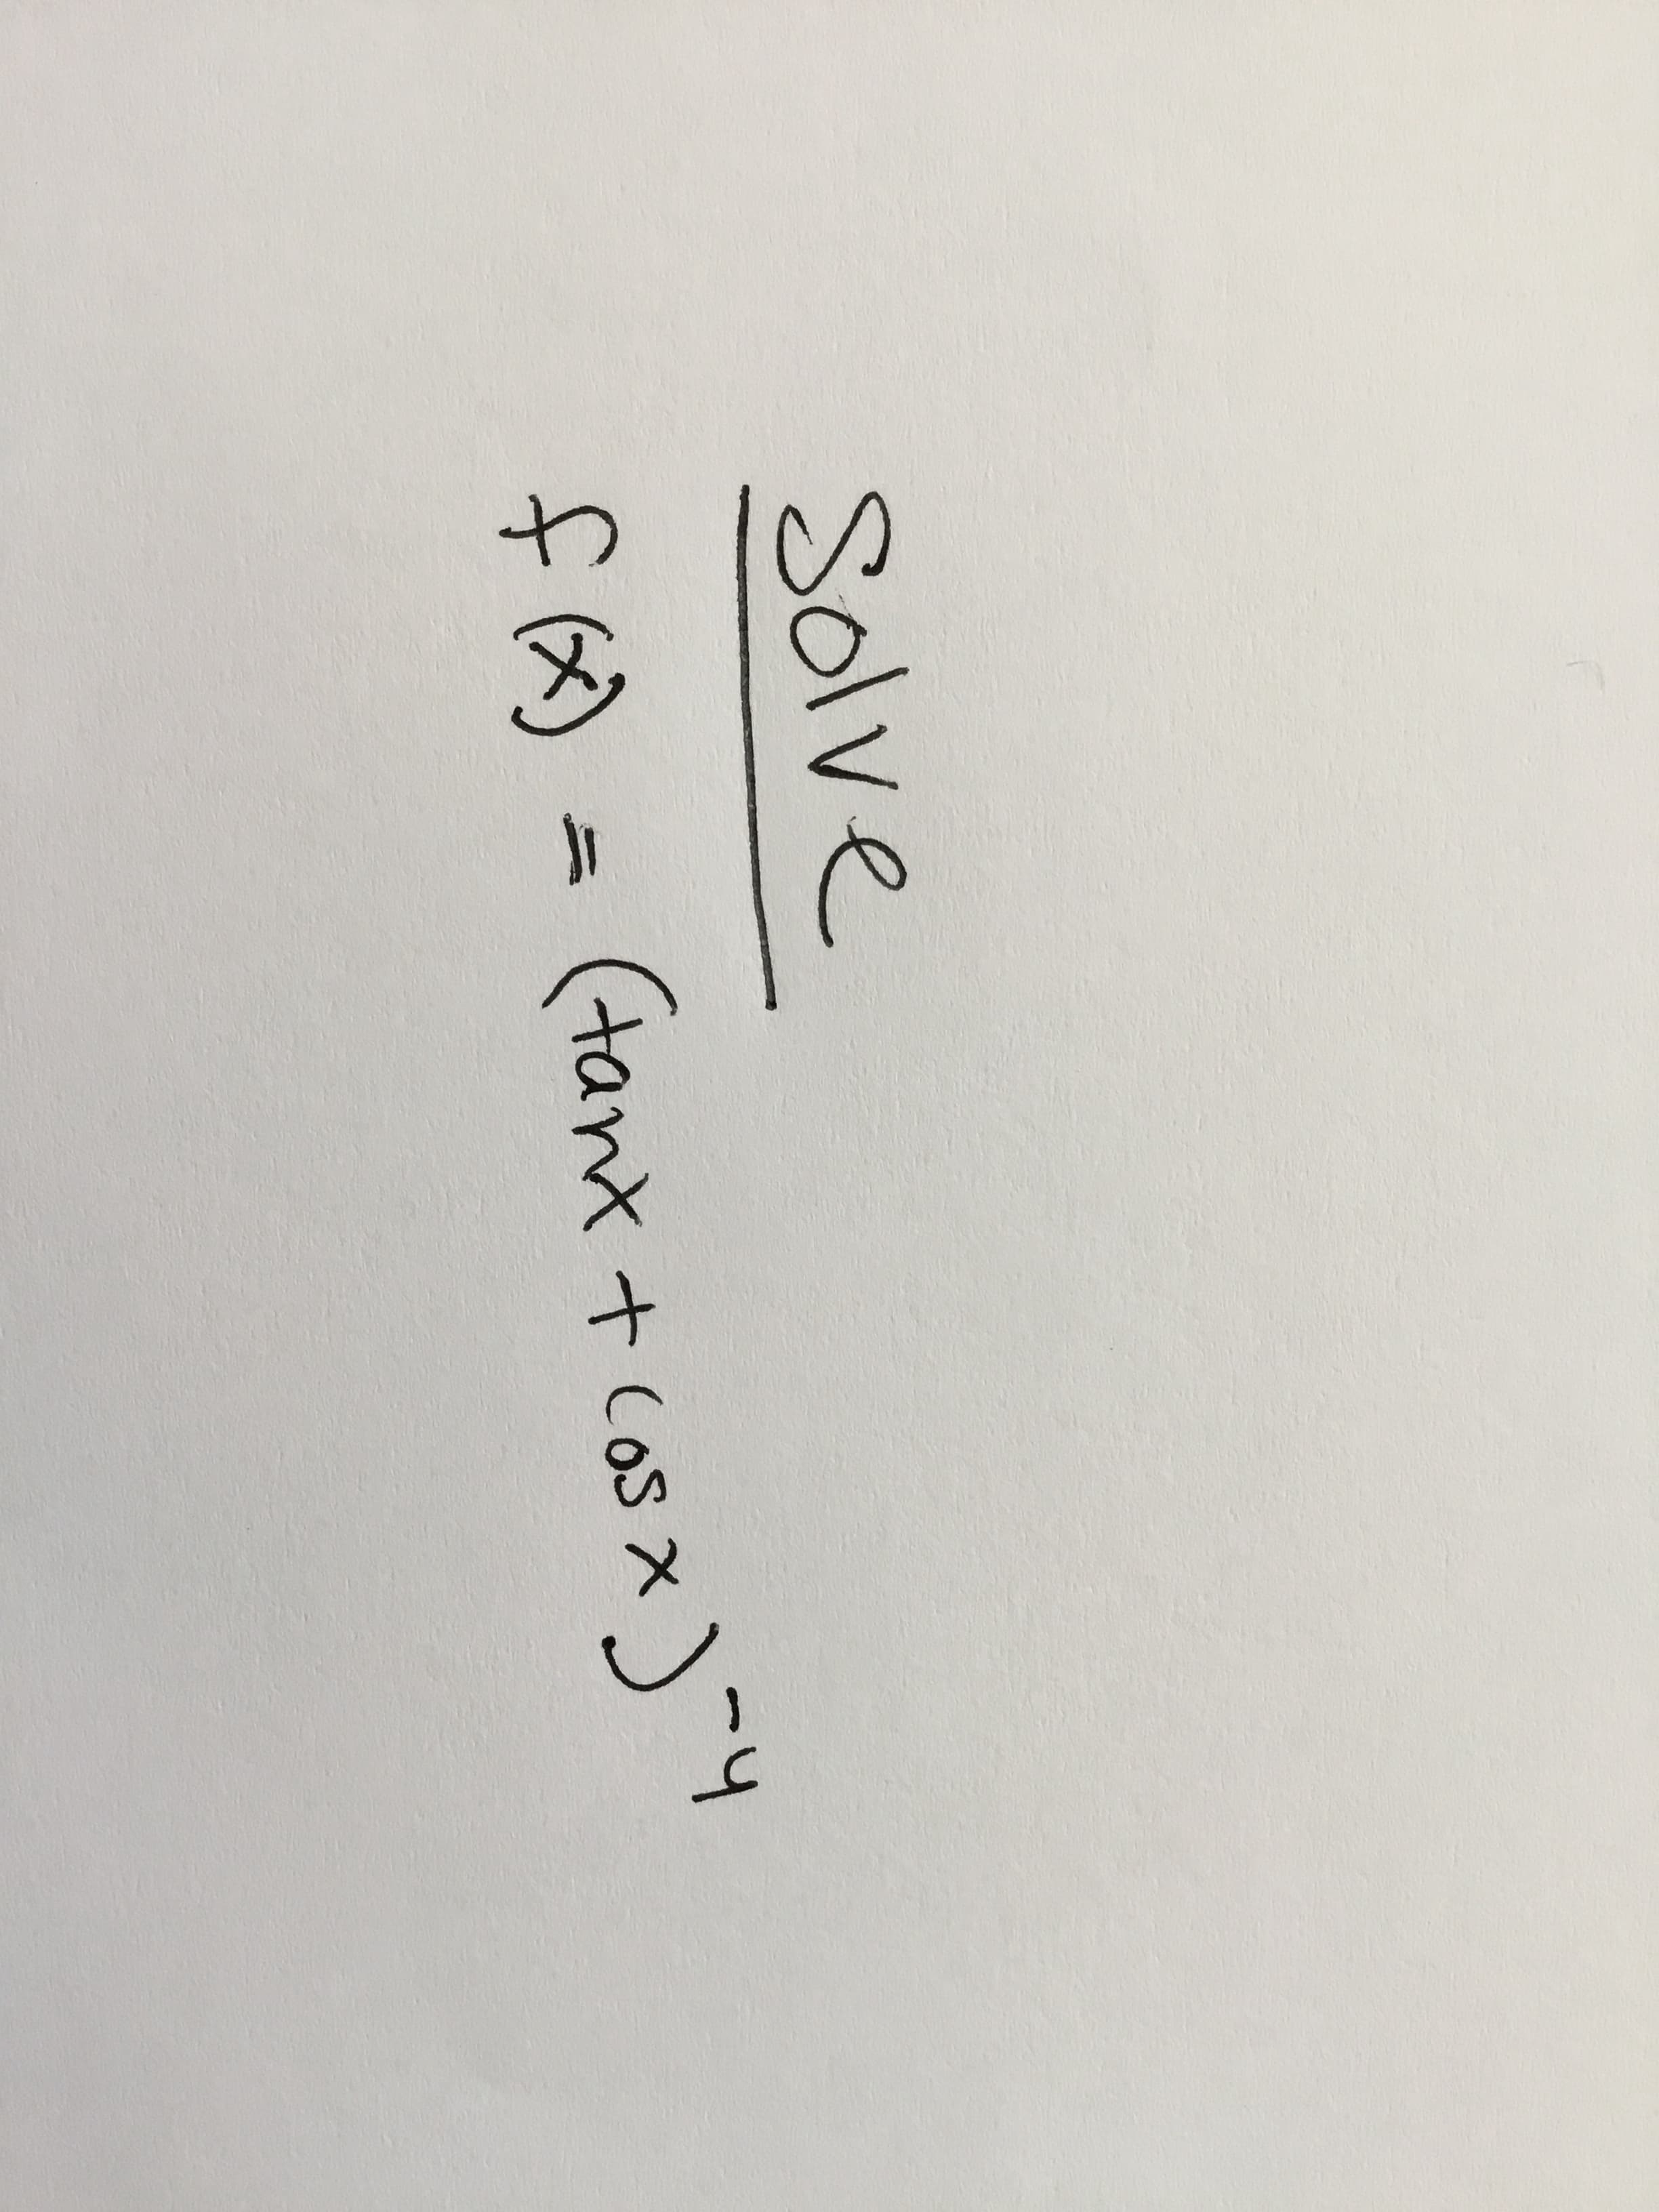 Solve
f ) = (tanX + Cos x
and t Cos X
